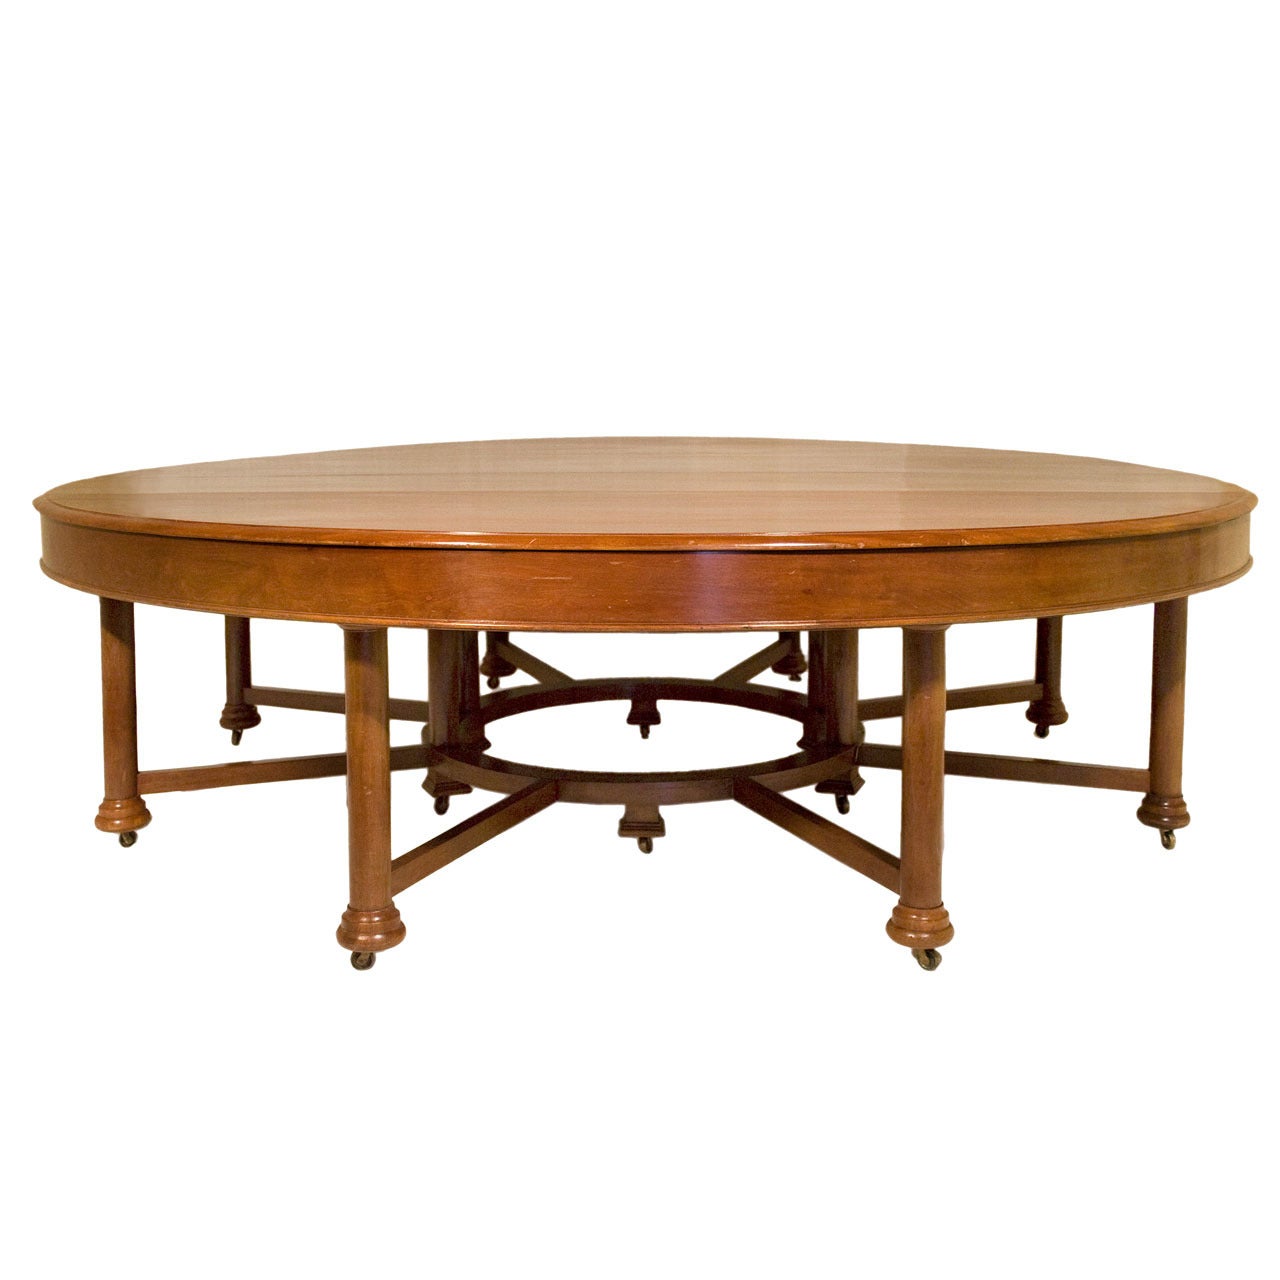 Exceptional 19th Century Mahogany Dining or Library Table